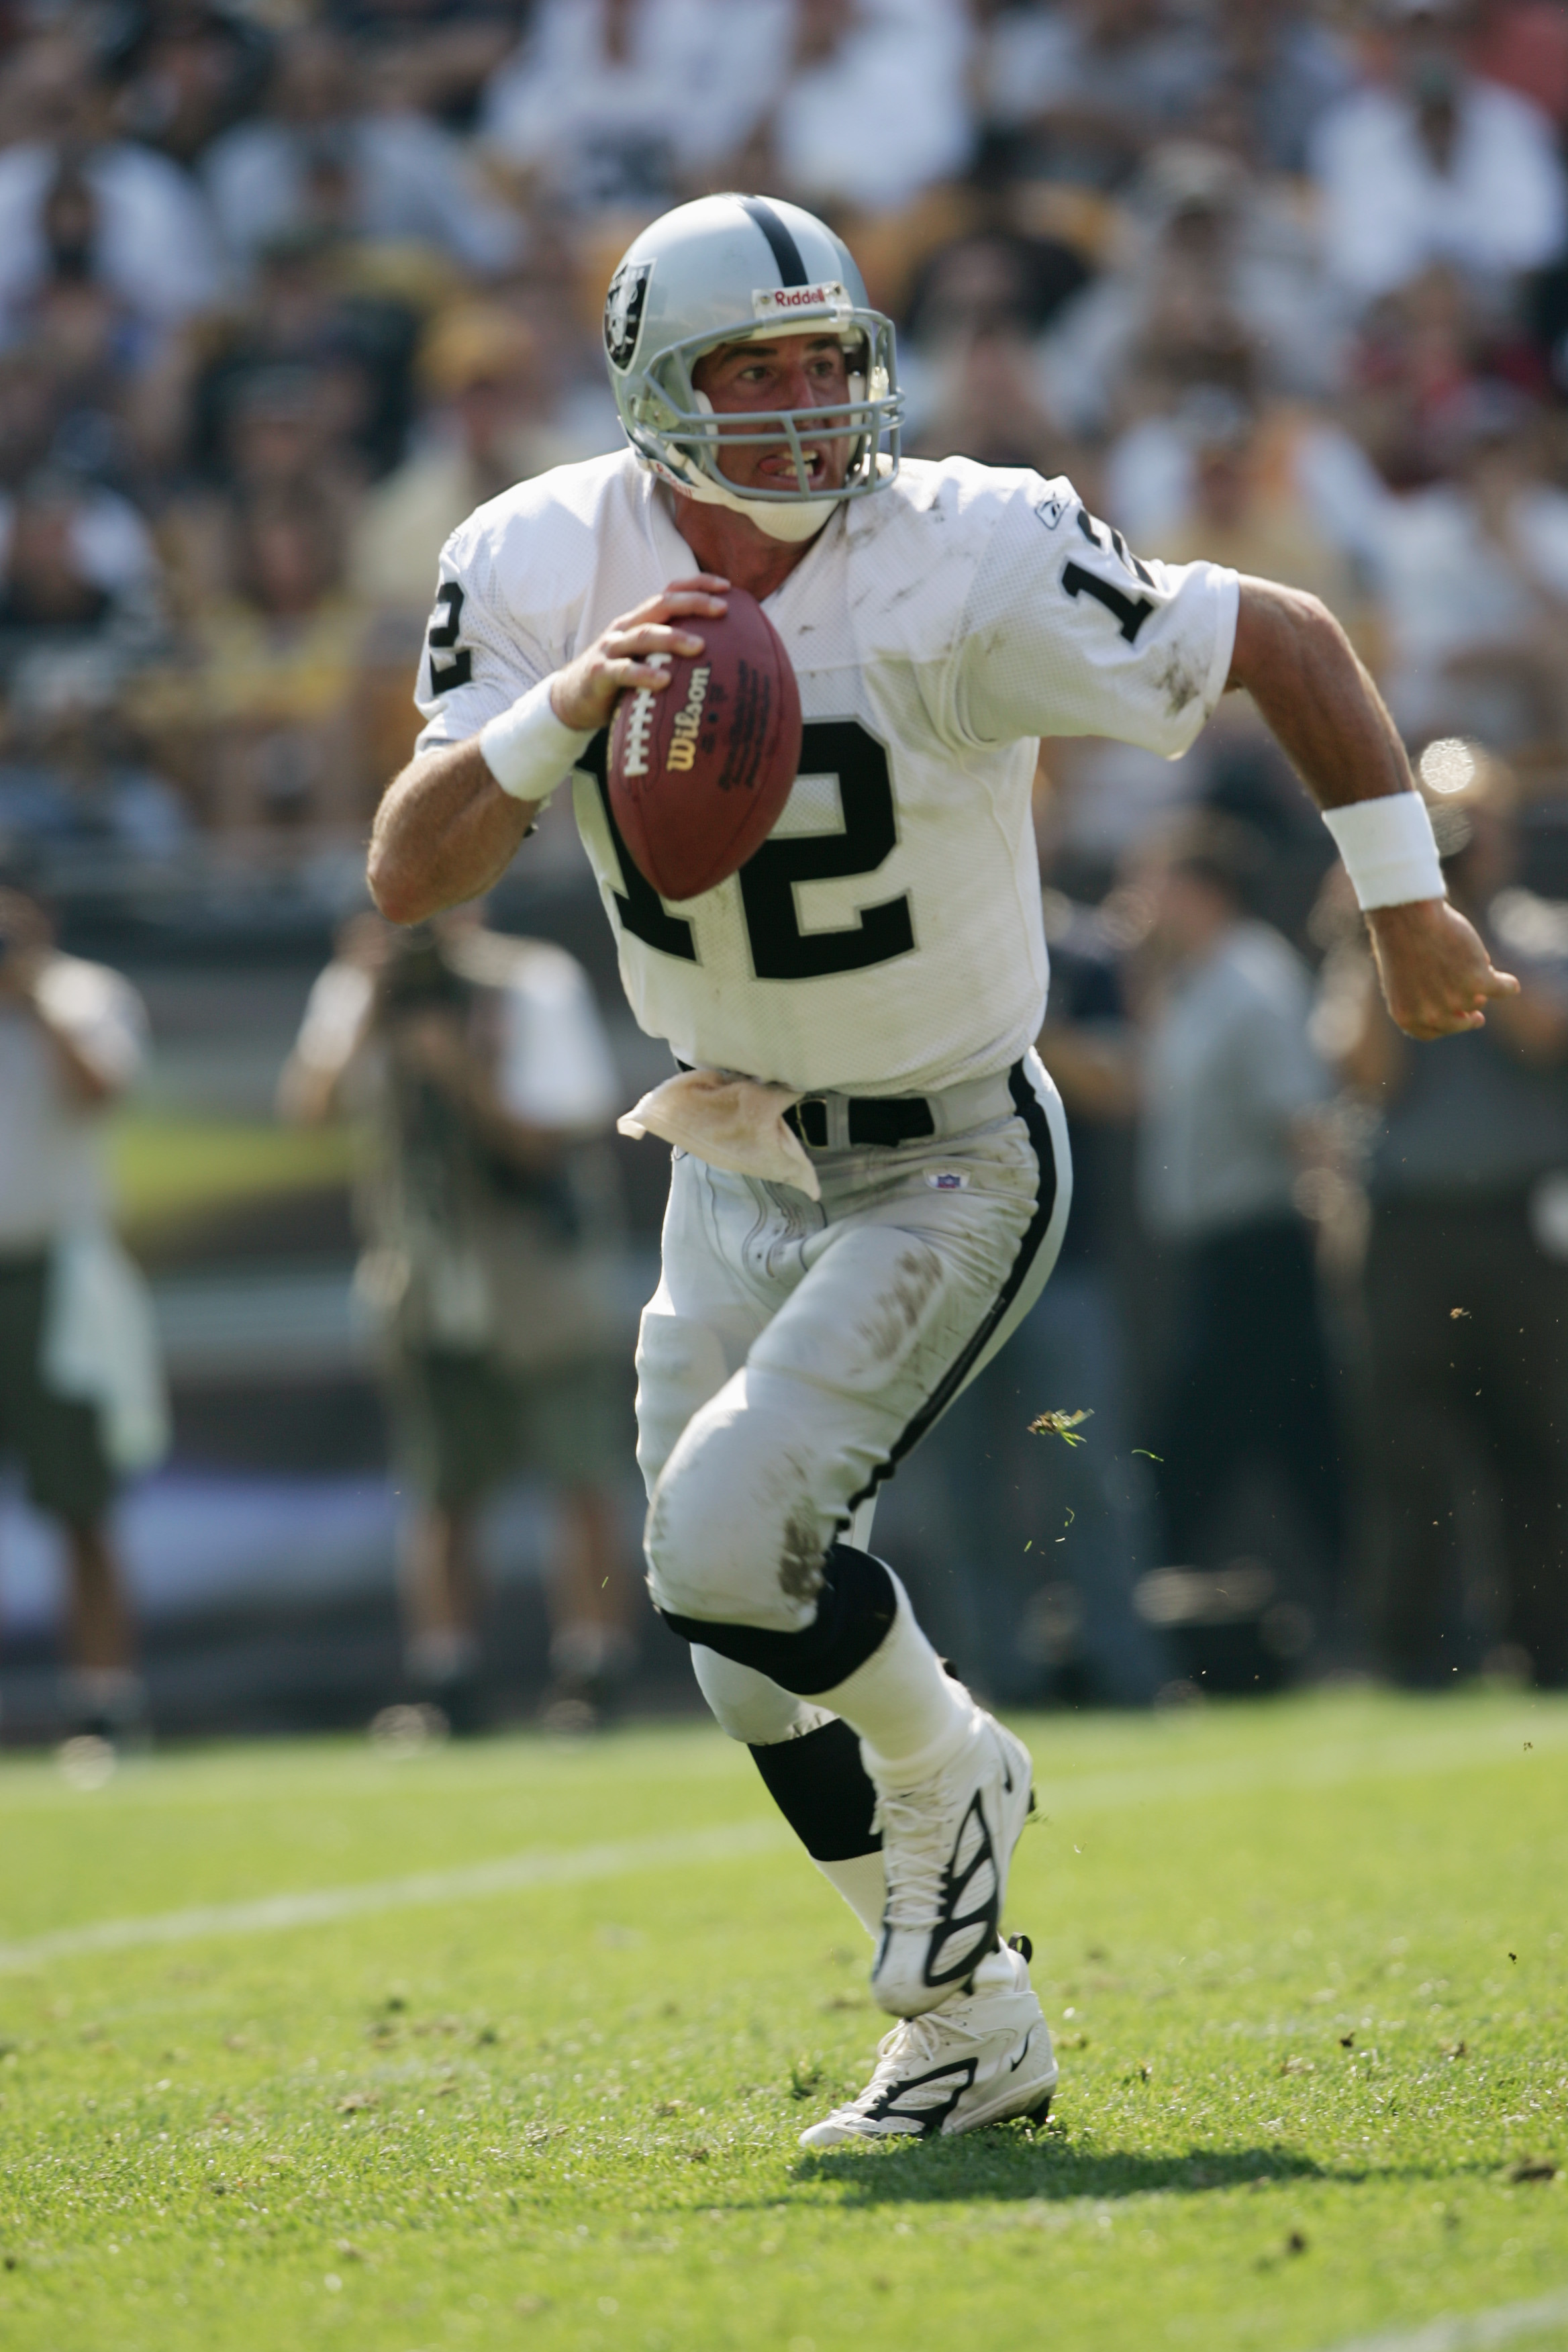 PITTSBURGH - SEPTEMBER 12:  Quarterback Rich Gannon #12 of the Oakland Raiders scrambles with the ball against the Pittsburgh Steelers during the game at Heinz Field on September 12, 2004 in Pittsburgh, Pennsylvania. The Steelers defeated the Raiders 24-2